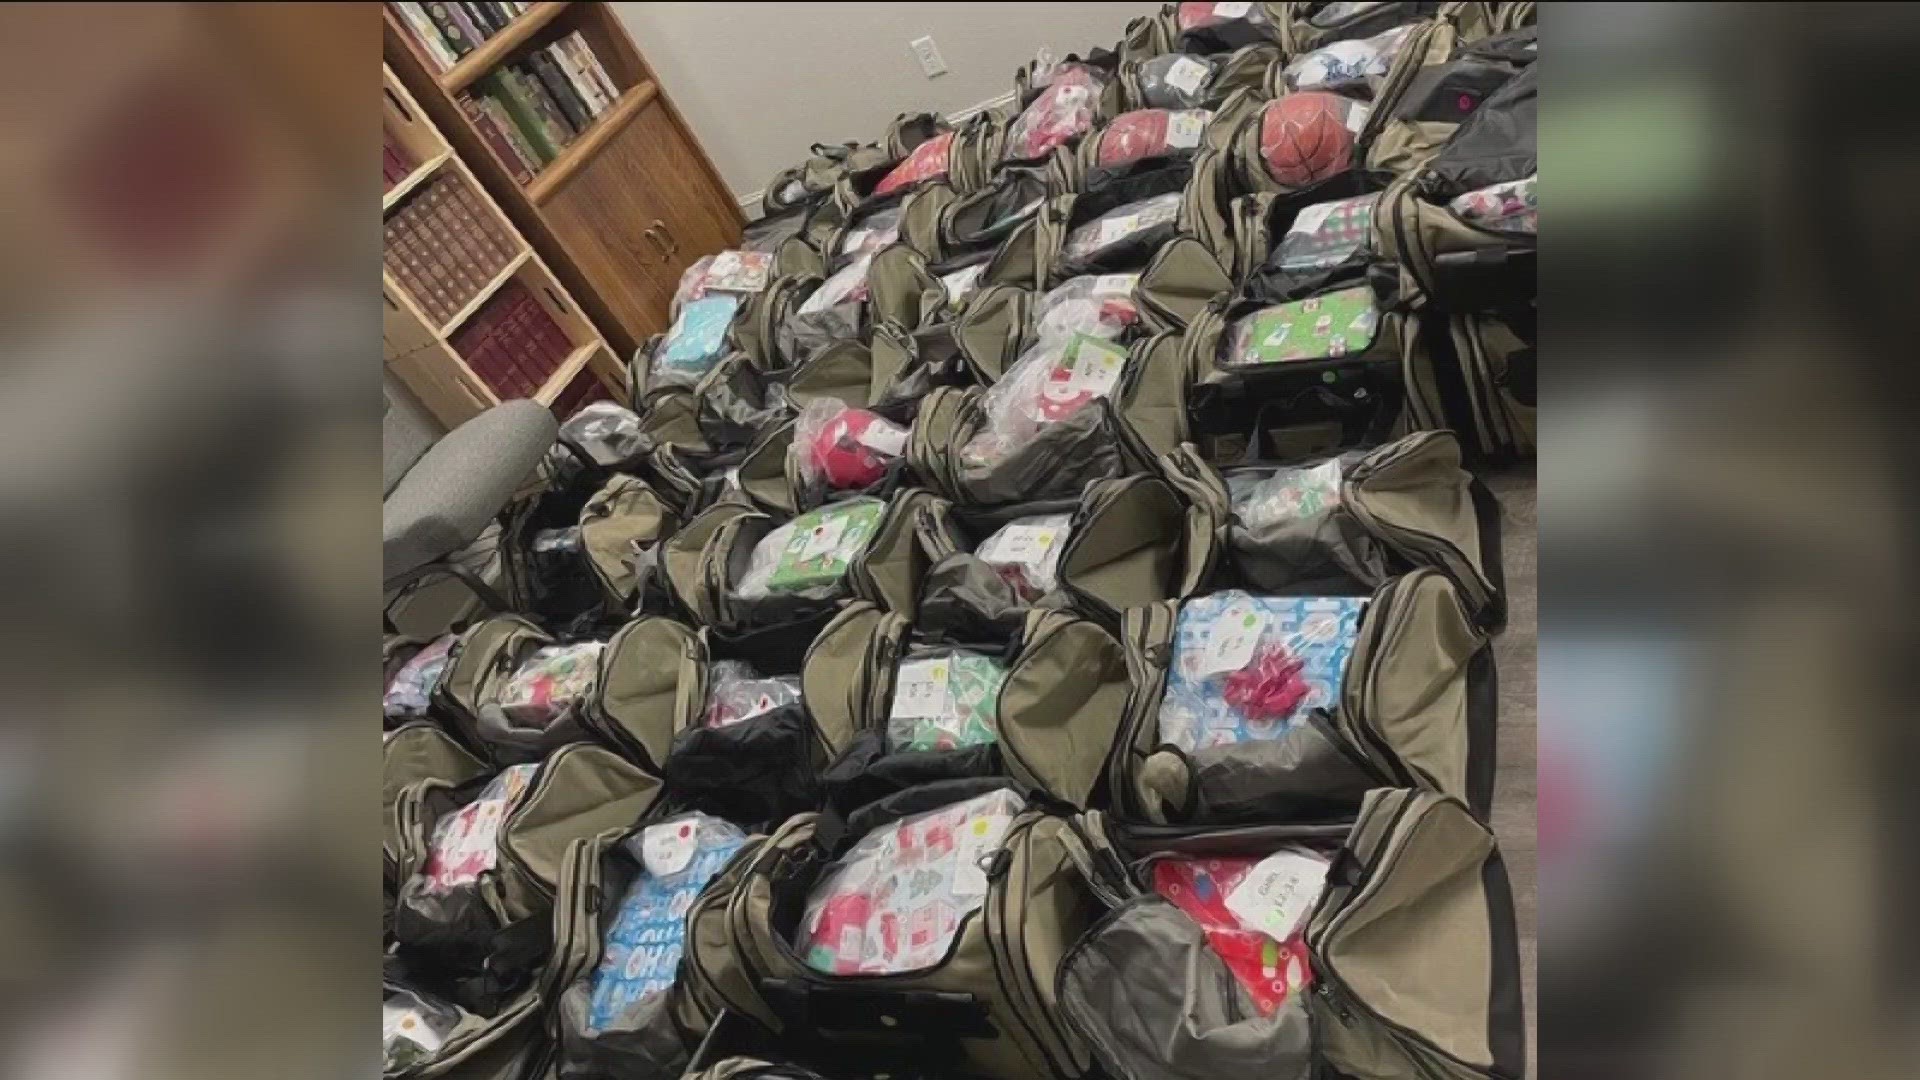 Day 1 Bags helps provide bags to those in foster care, regardless of if they are aging out or have just entered the system.